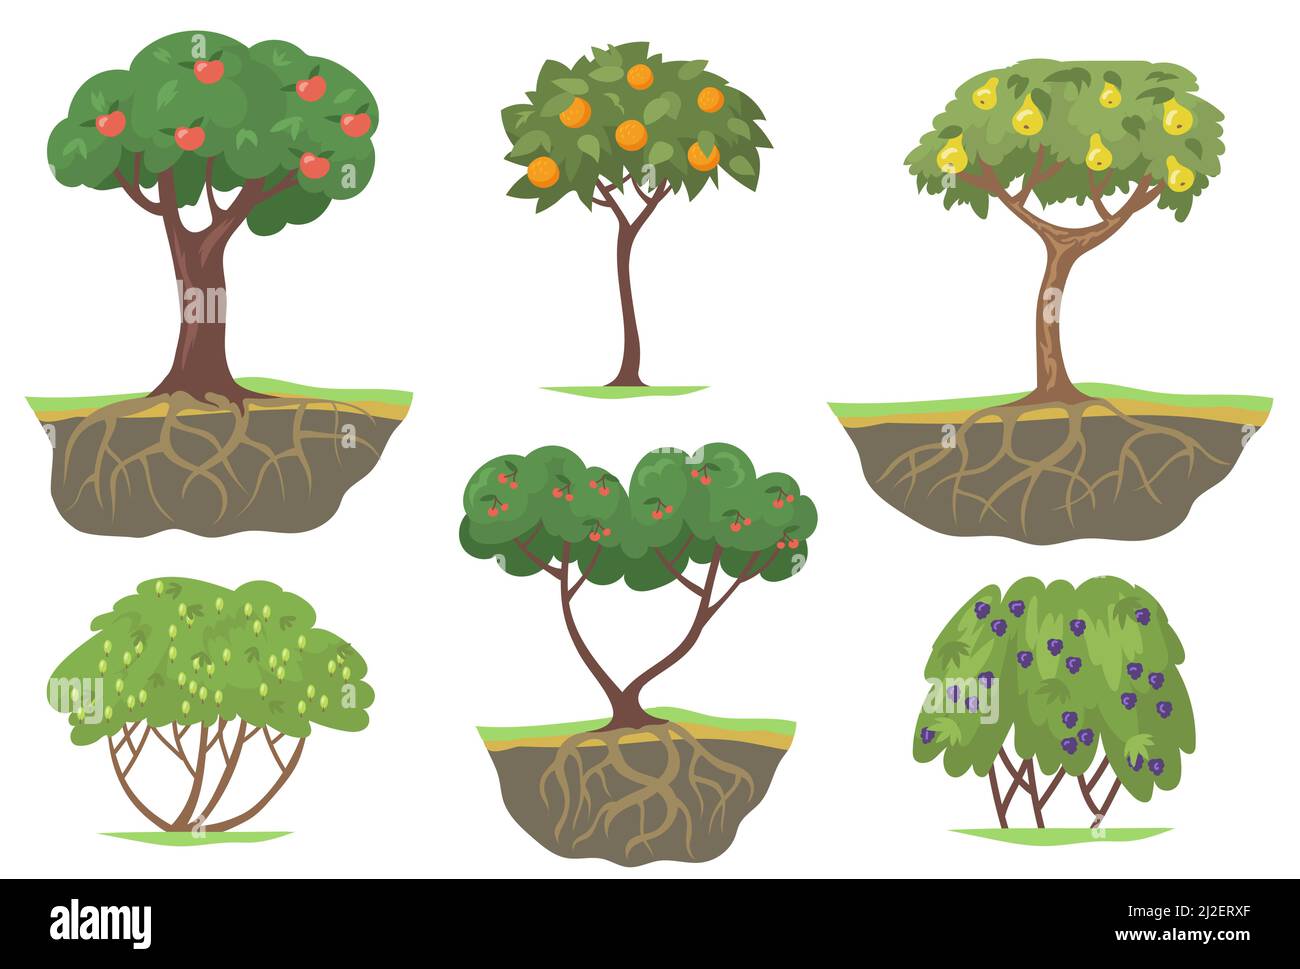 Green fruit trees and berry bushes flat set for web design. Cartoon ripe apples, oranges, peaches and blackberry isolated vector illustration collecti Stock Vector